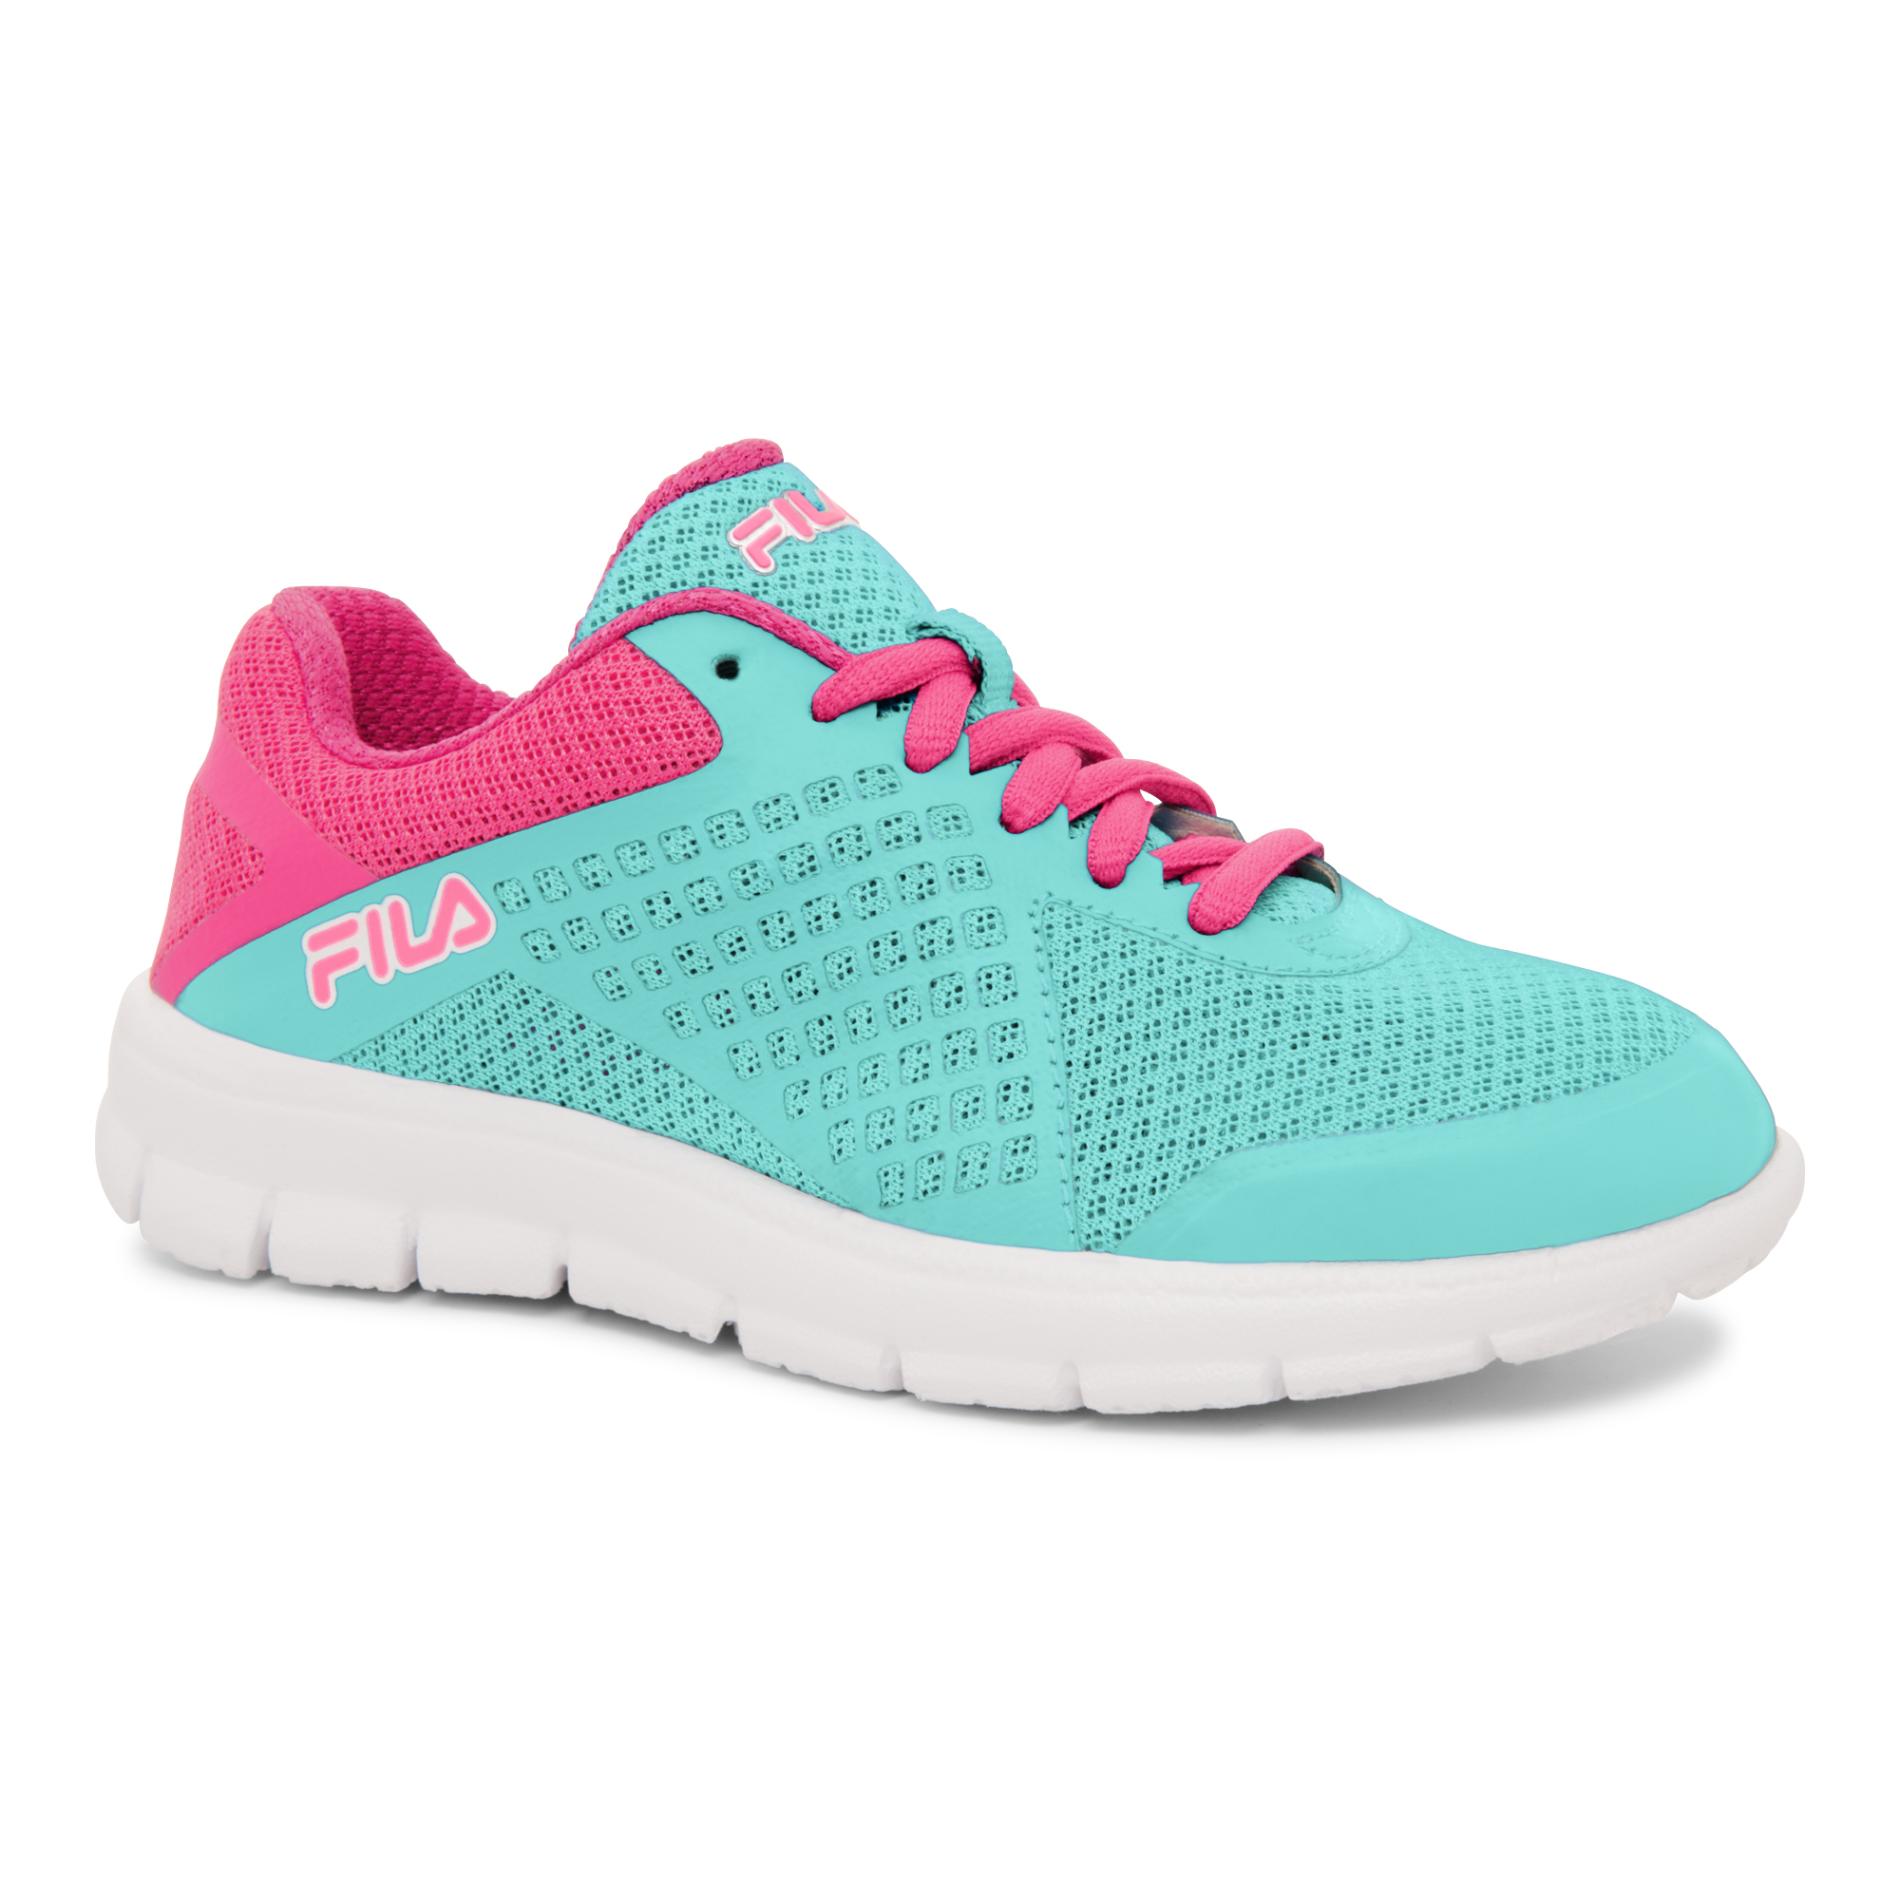 Fila Girl's Faction Turquoise/Pink Athletic Shoe